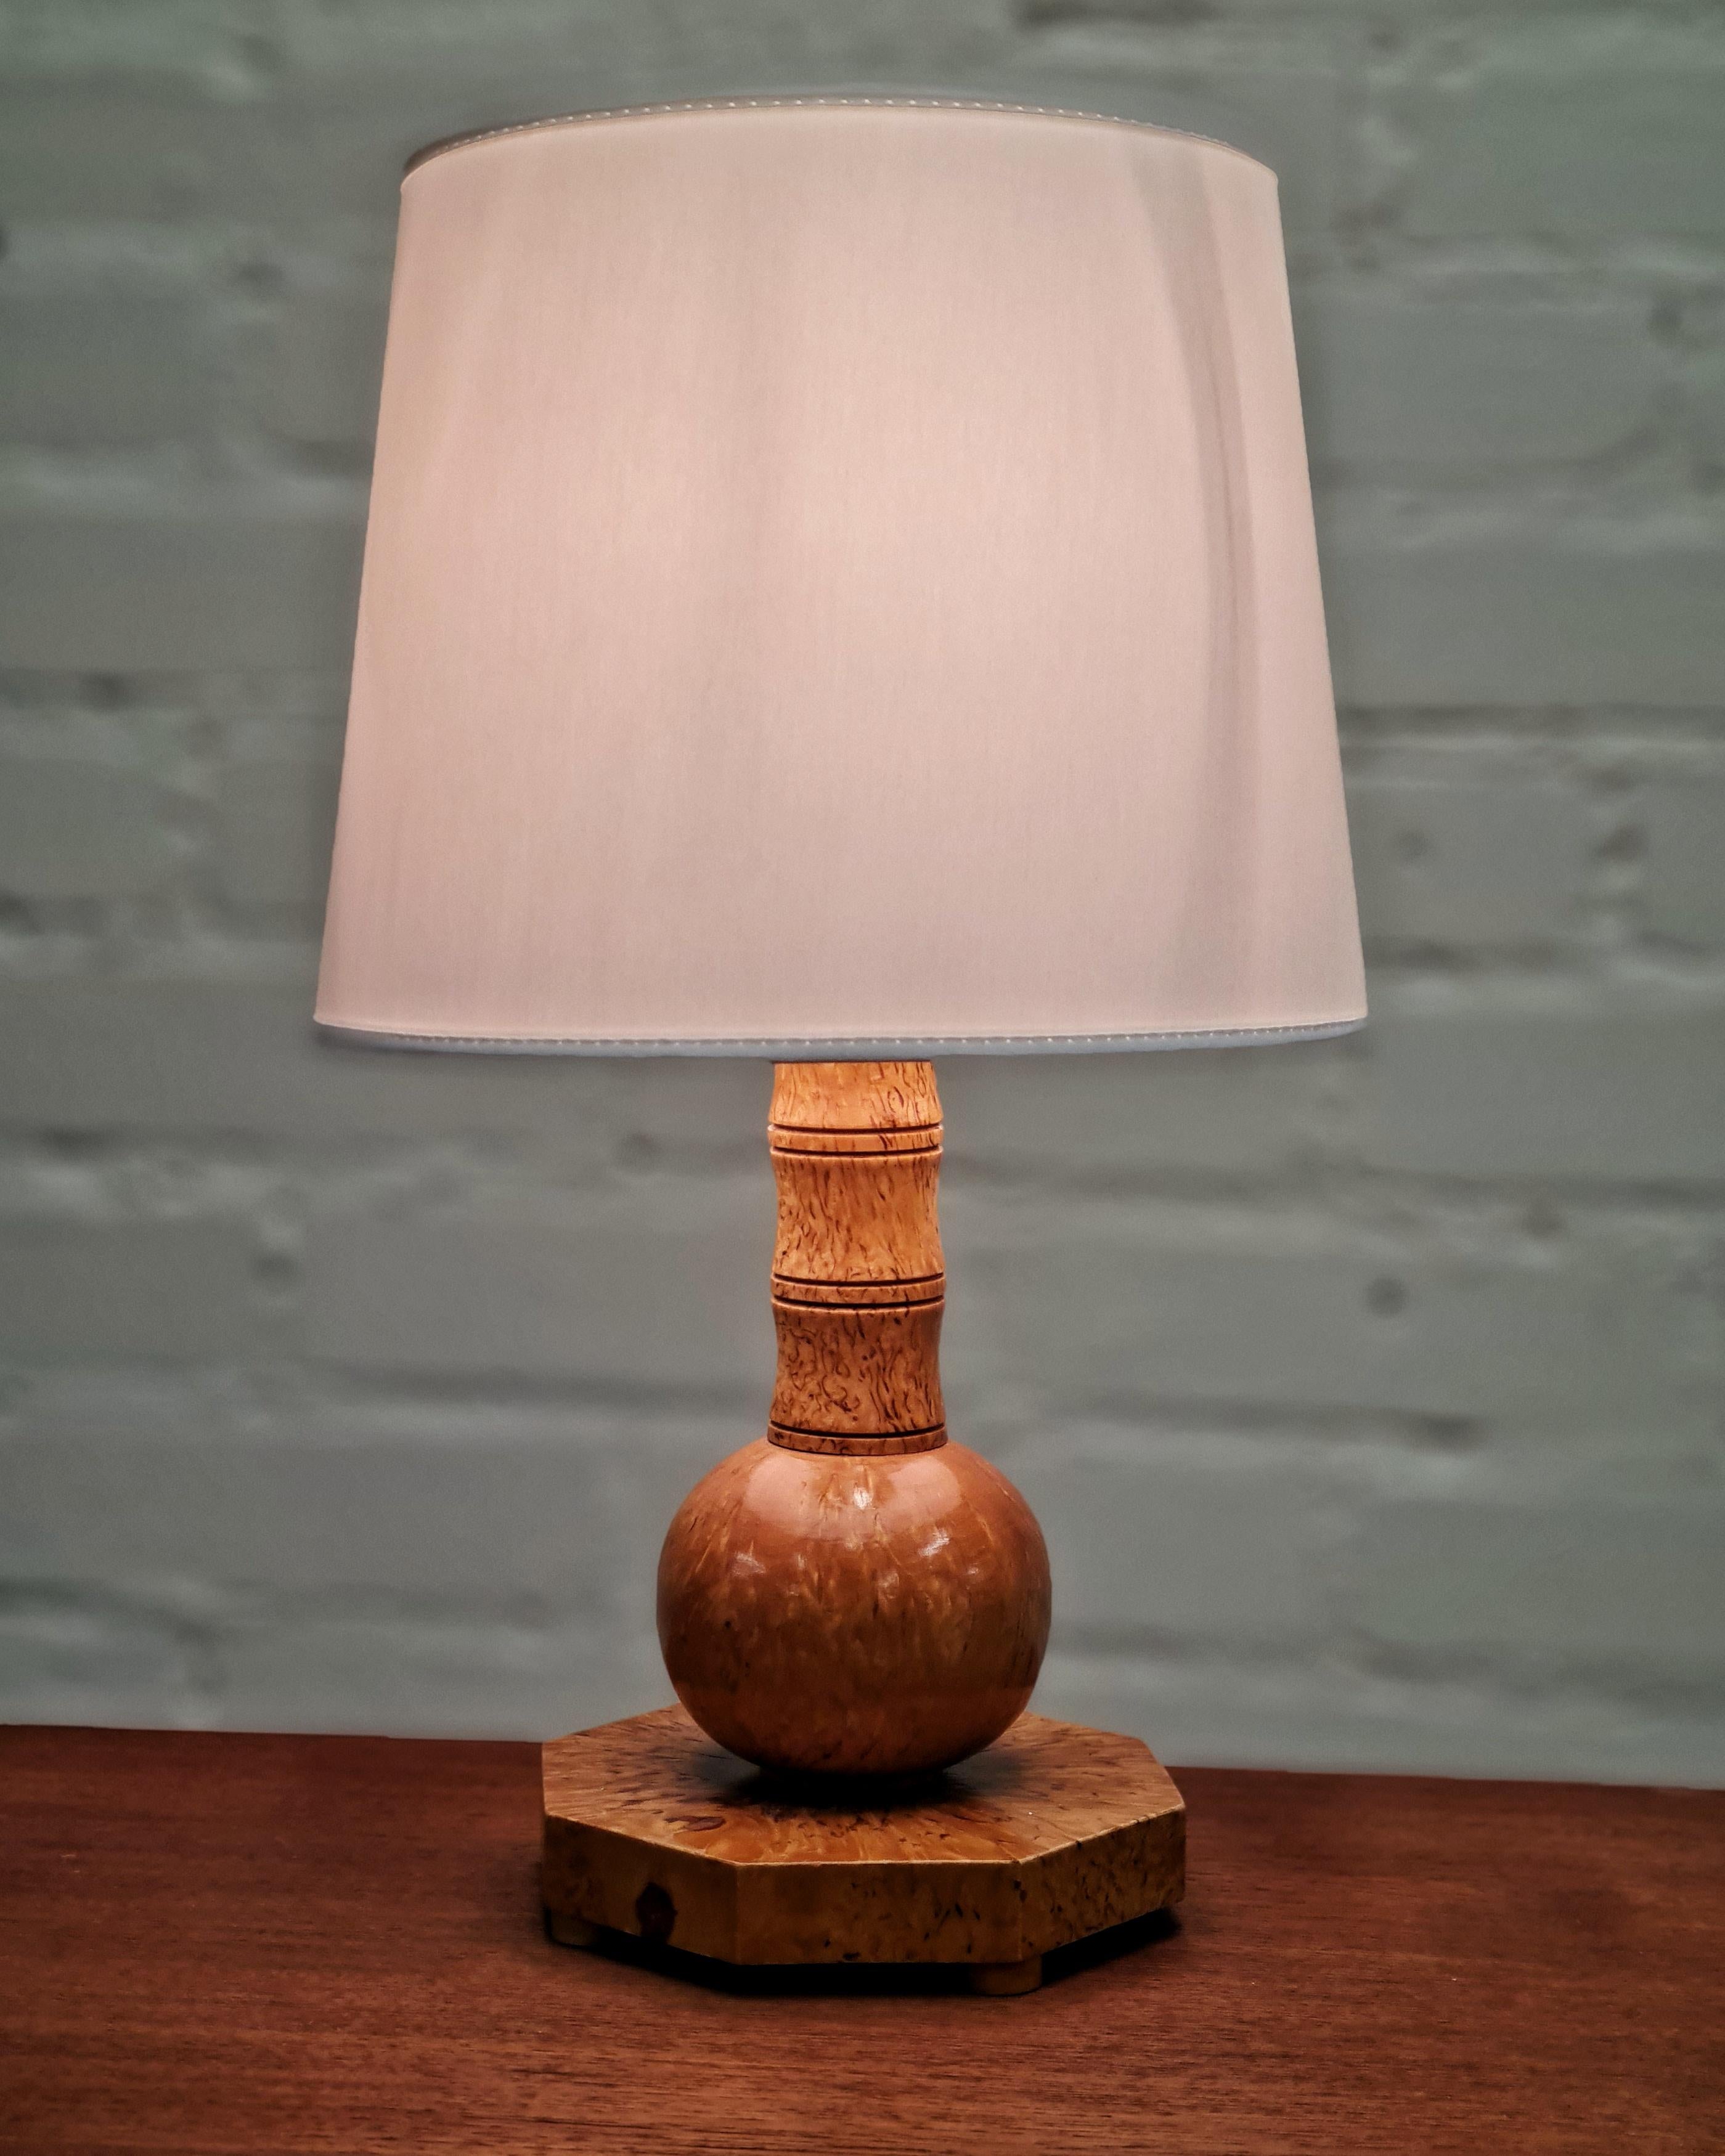 This is a hand-made lamp. The material used is widely available in Finland. 
It´s quite simple in design and suits almost any interior. Finnish design is rich in items that look very natural, almost as an extension of nature itself. 
